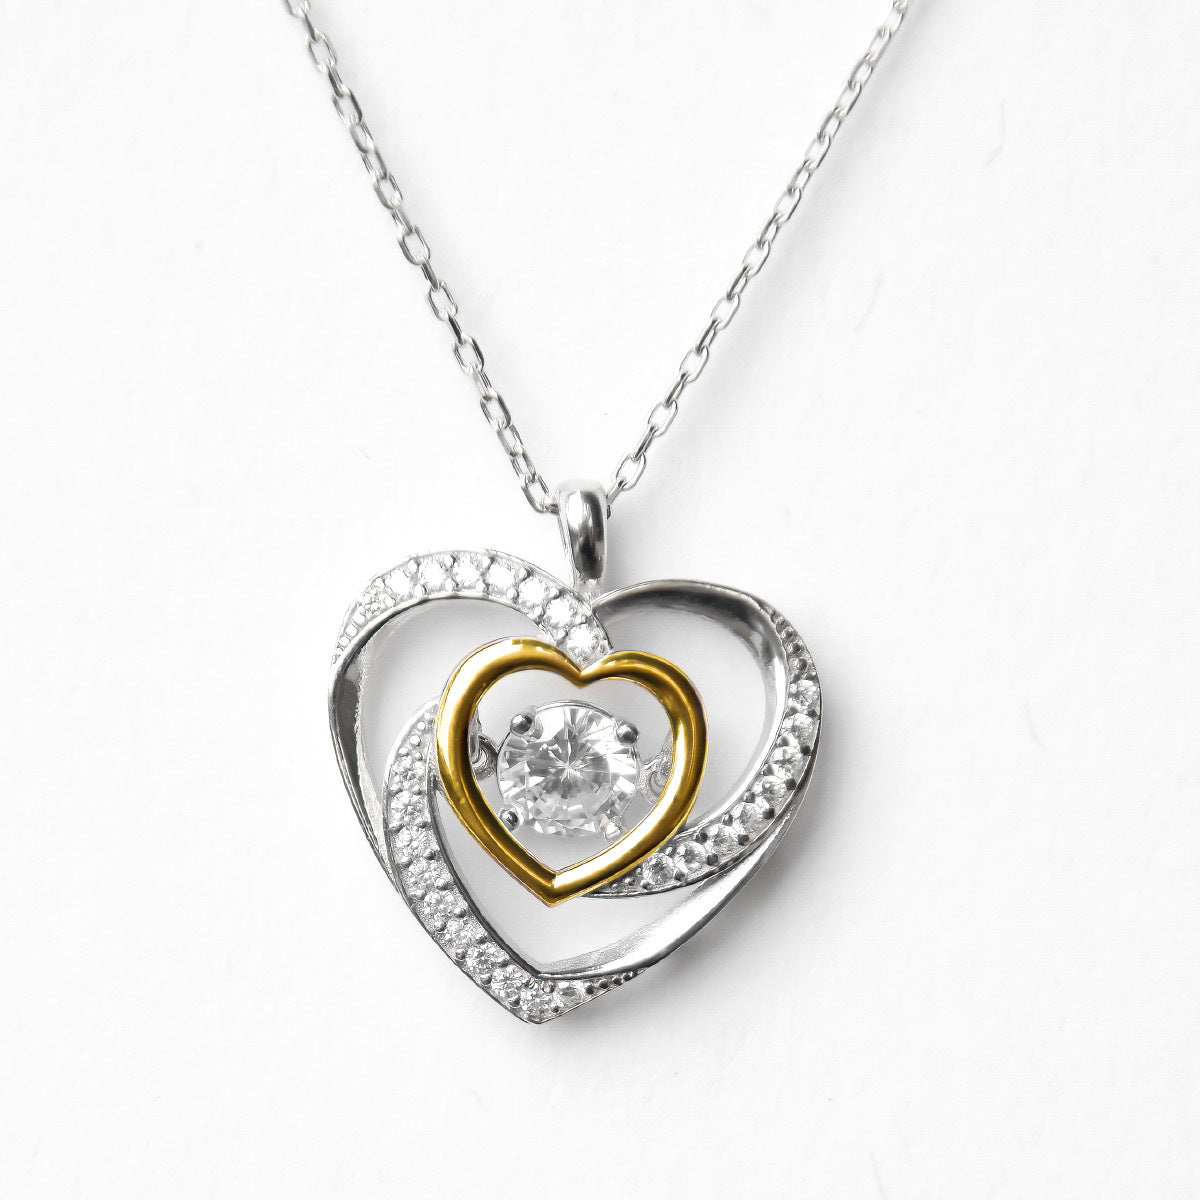 Crazy in Love - Dancing Crystal Twisted Heart Necklace Gift Set